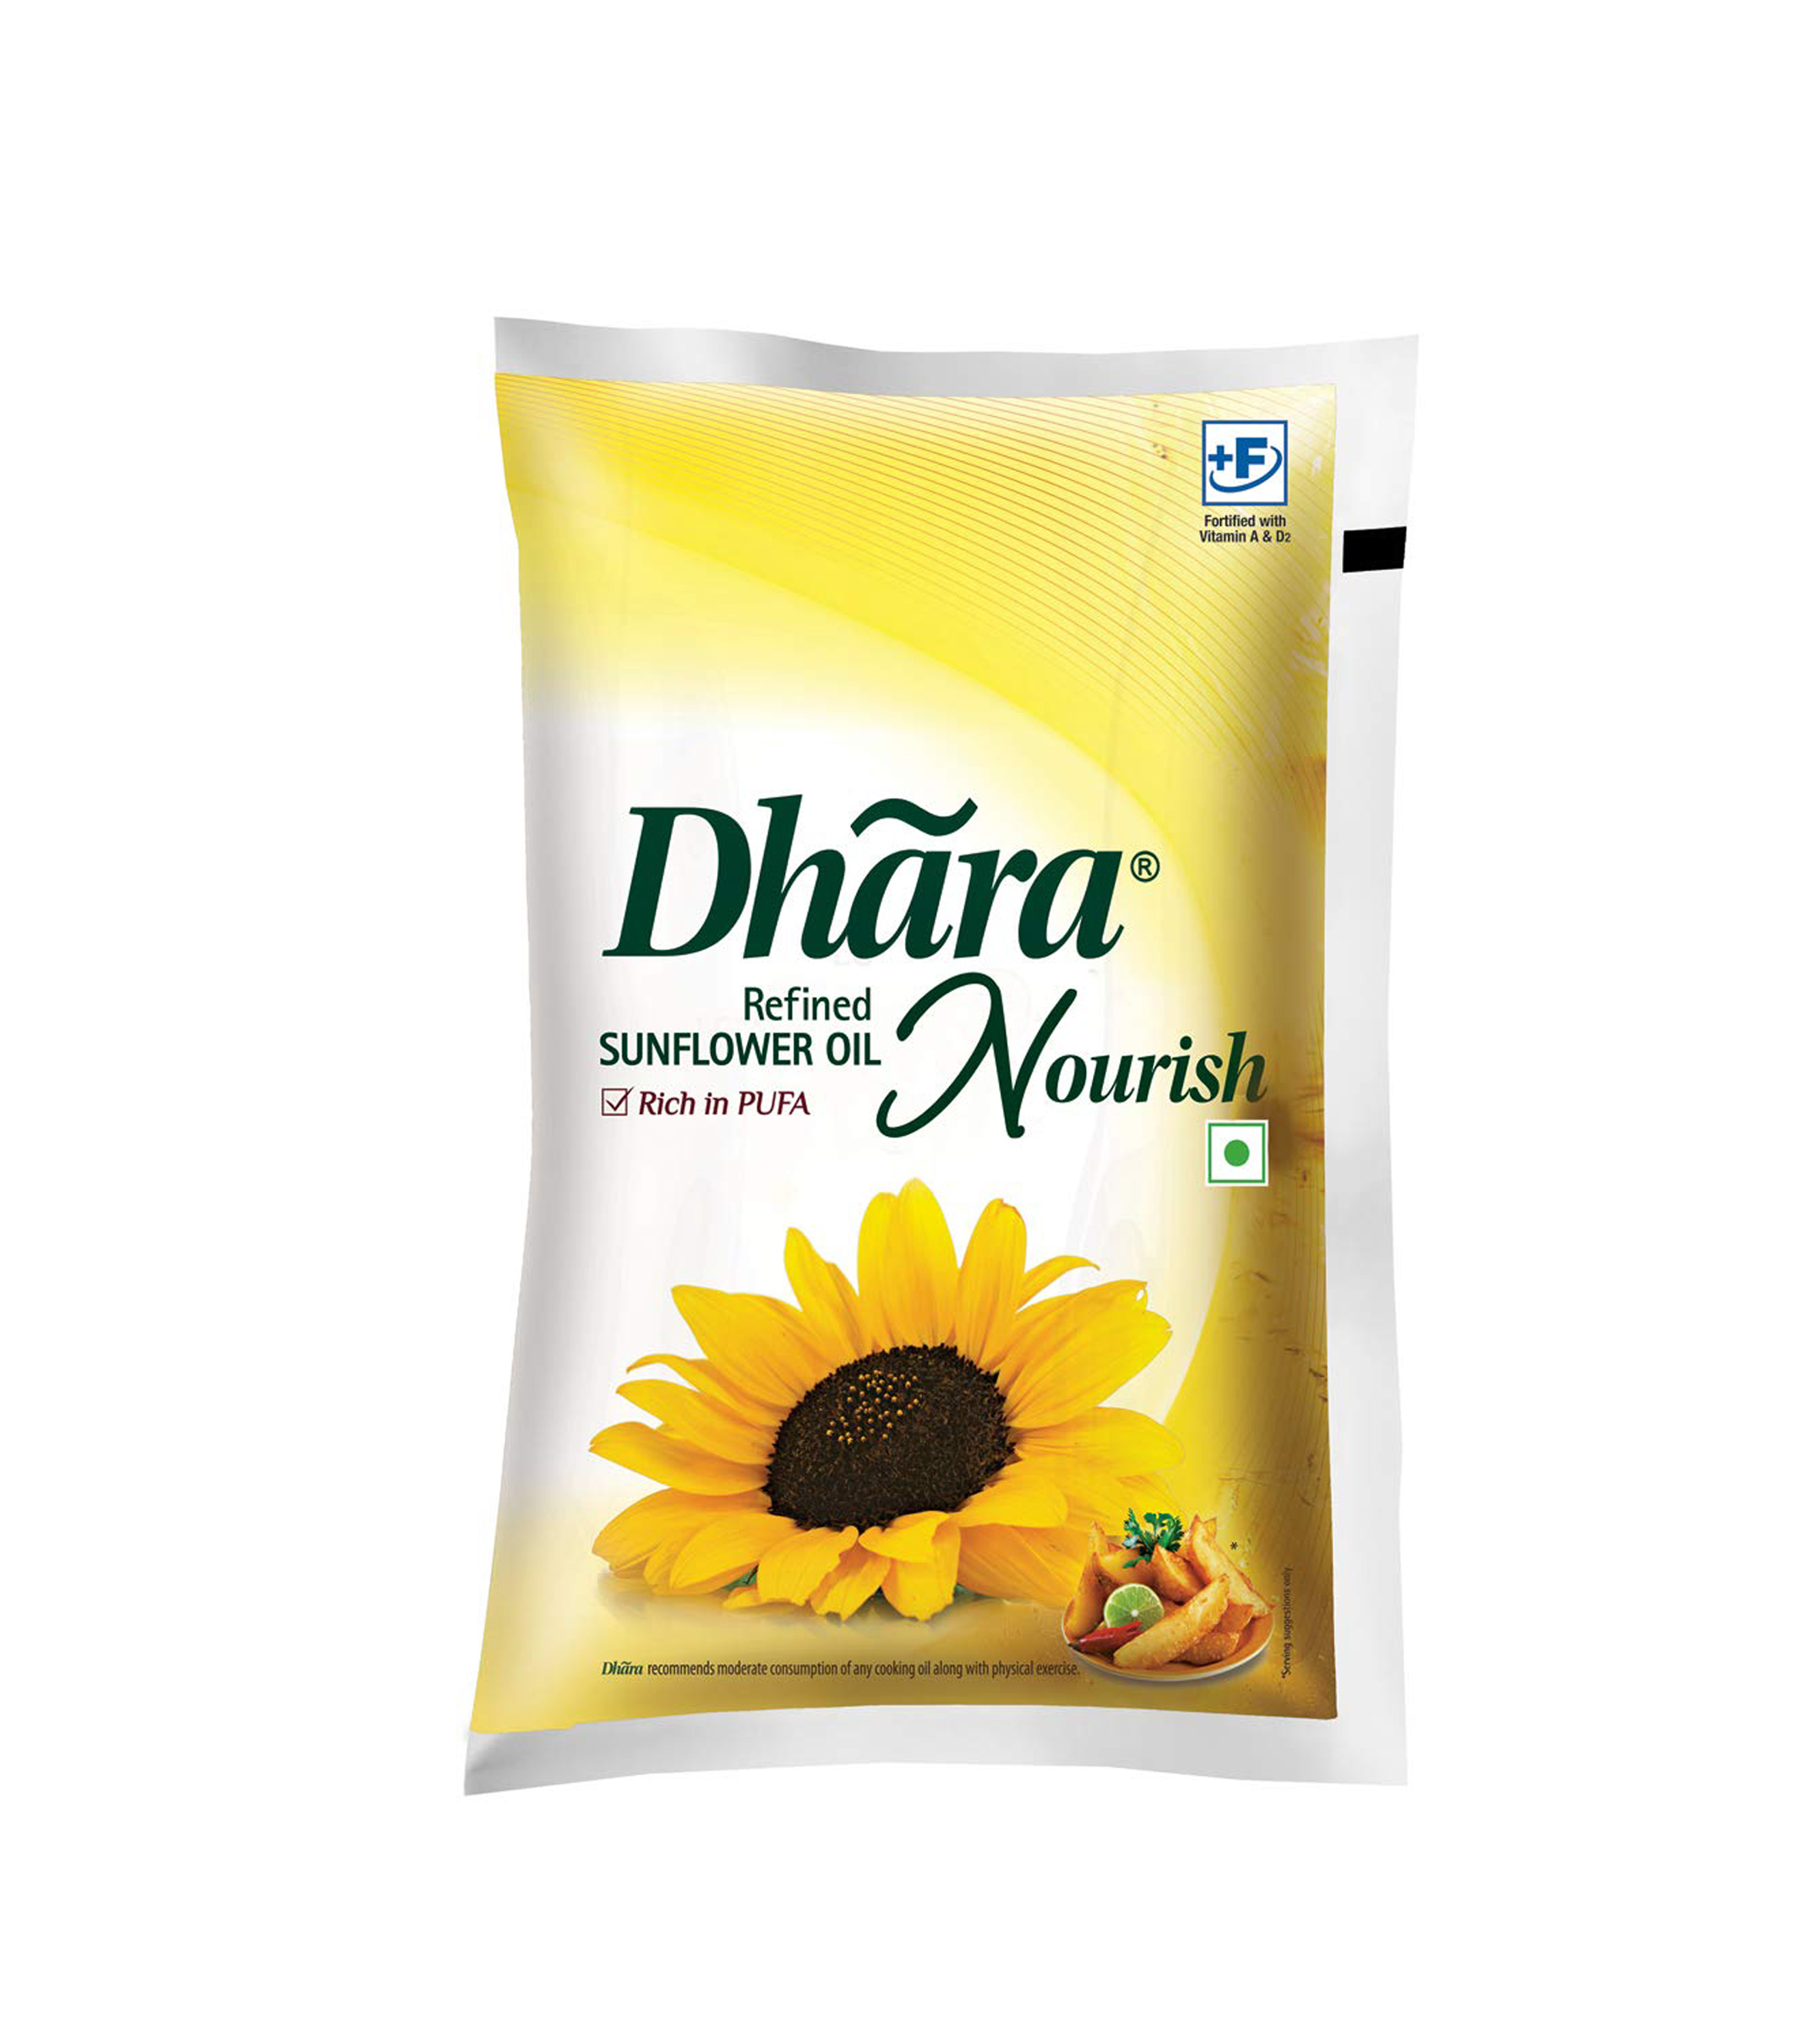 Dhara Refined Sunflower Oil 1 Ltr Pouch